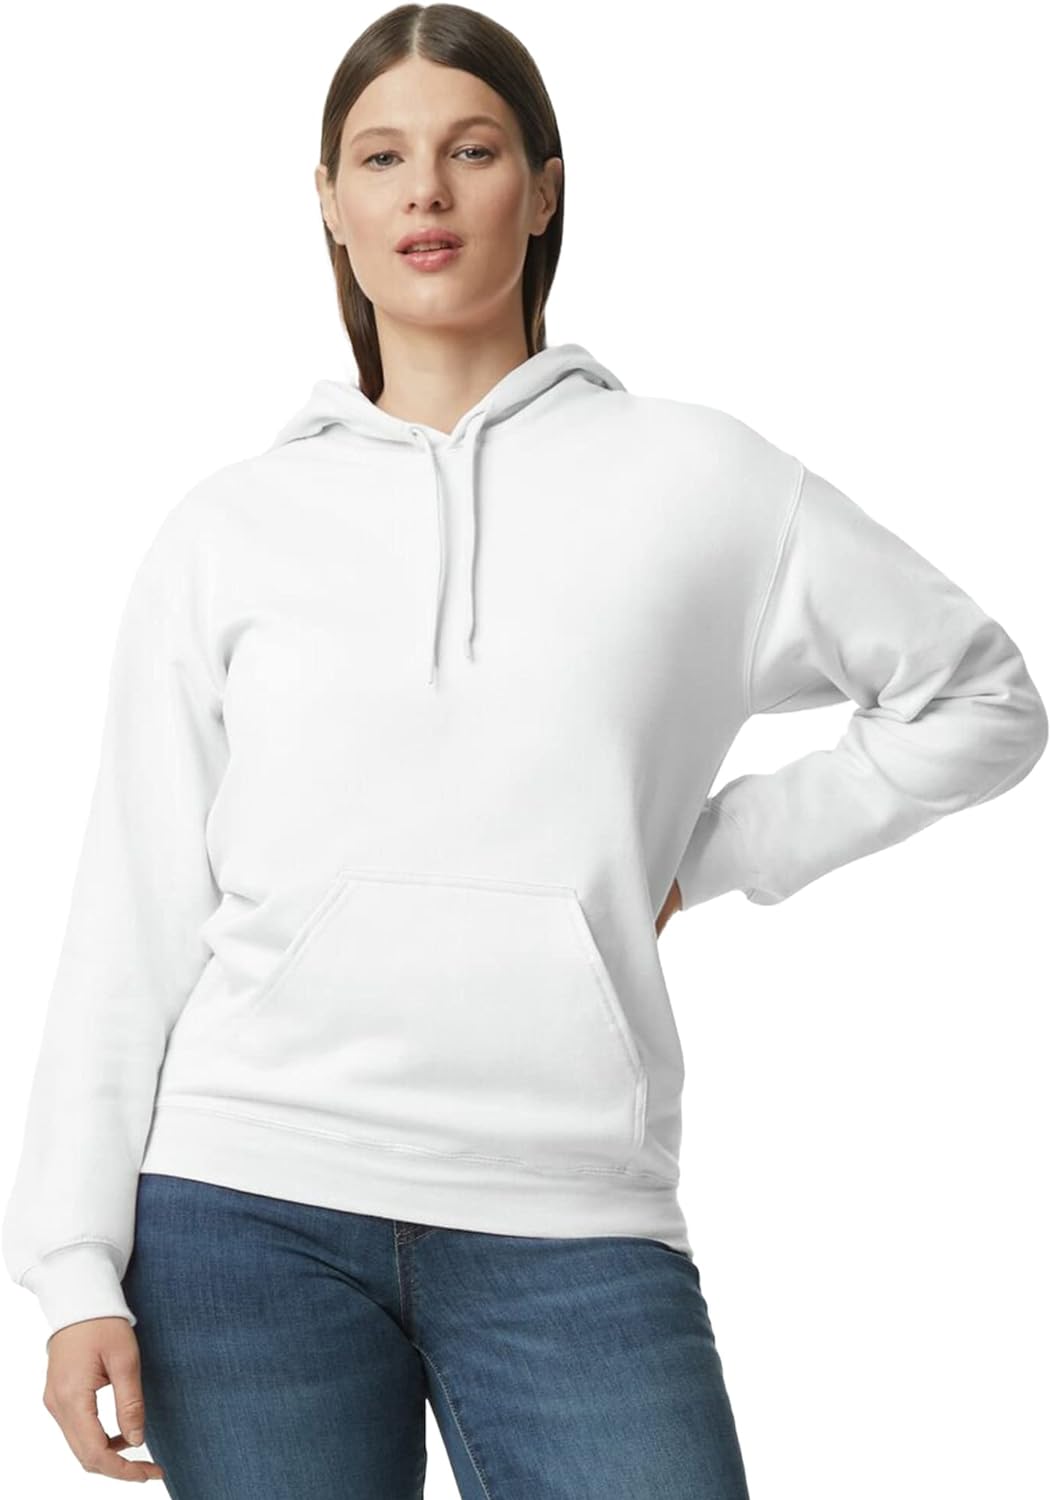 Women's Plain White Hoodie - Quality Casual Clothes for Better Value